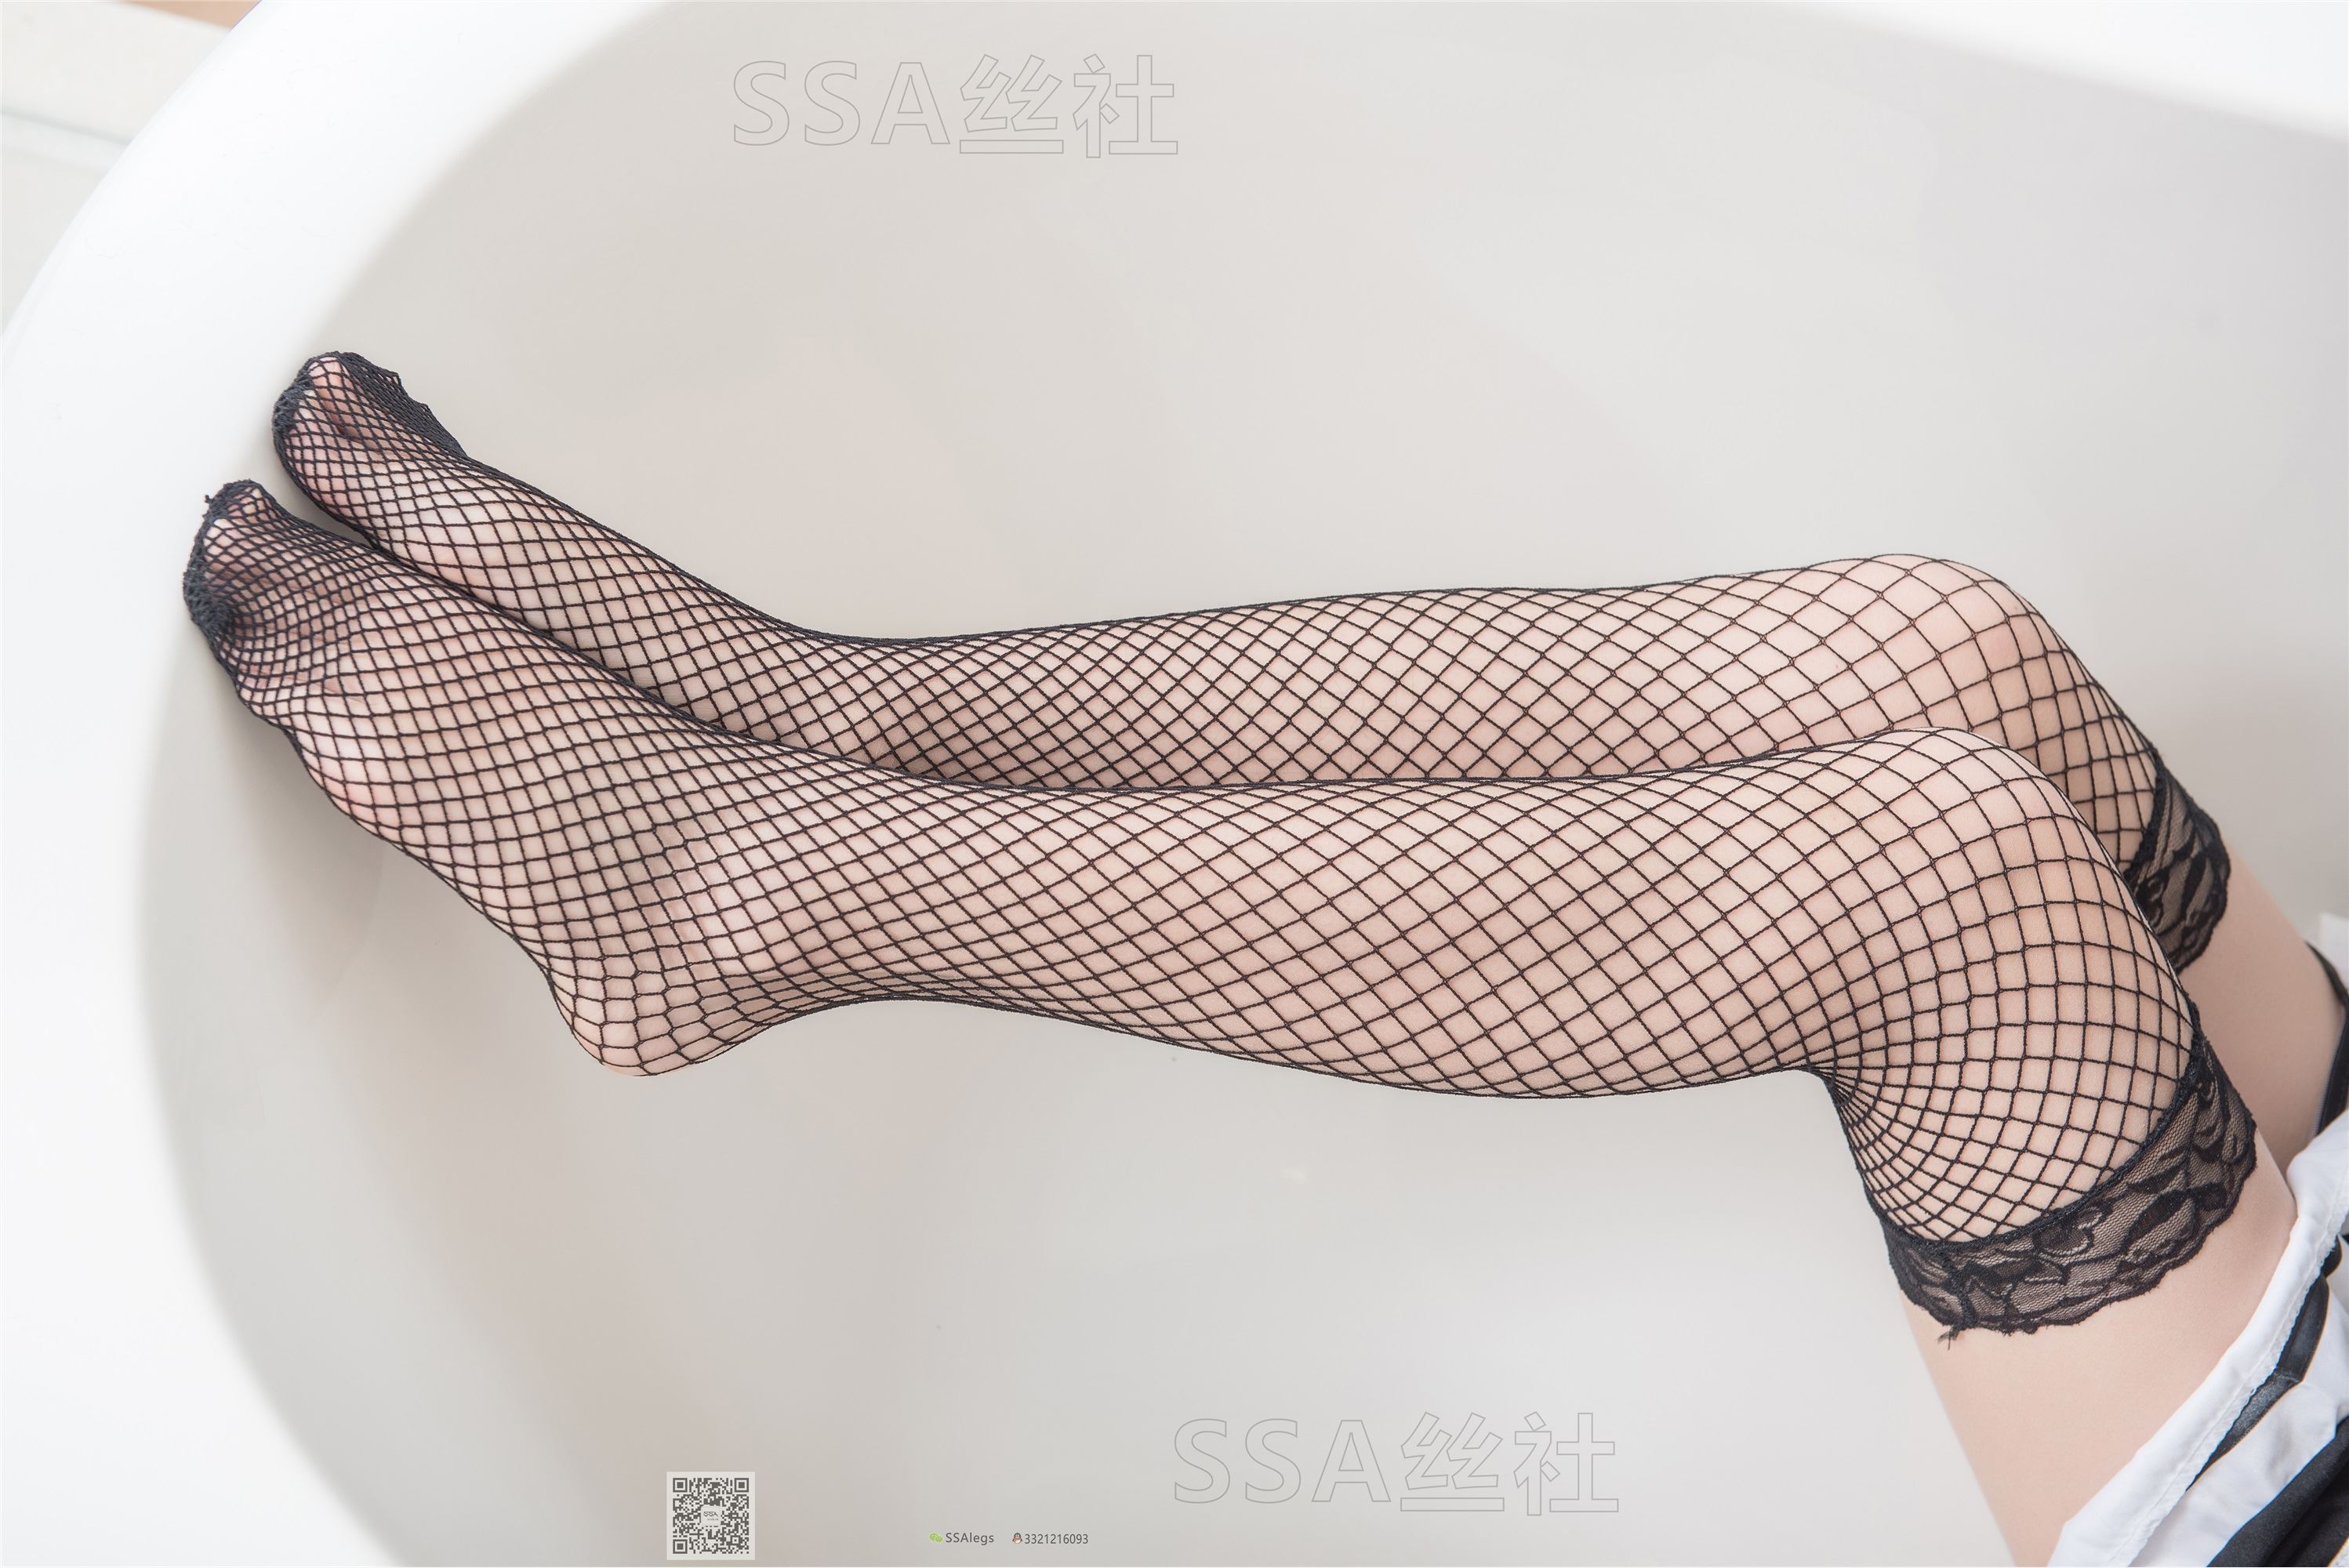 SSA Silk Society super clear photo NO.066 Xixi playthings mourning net socks